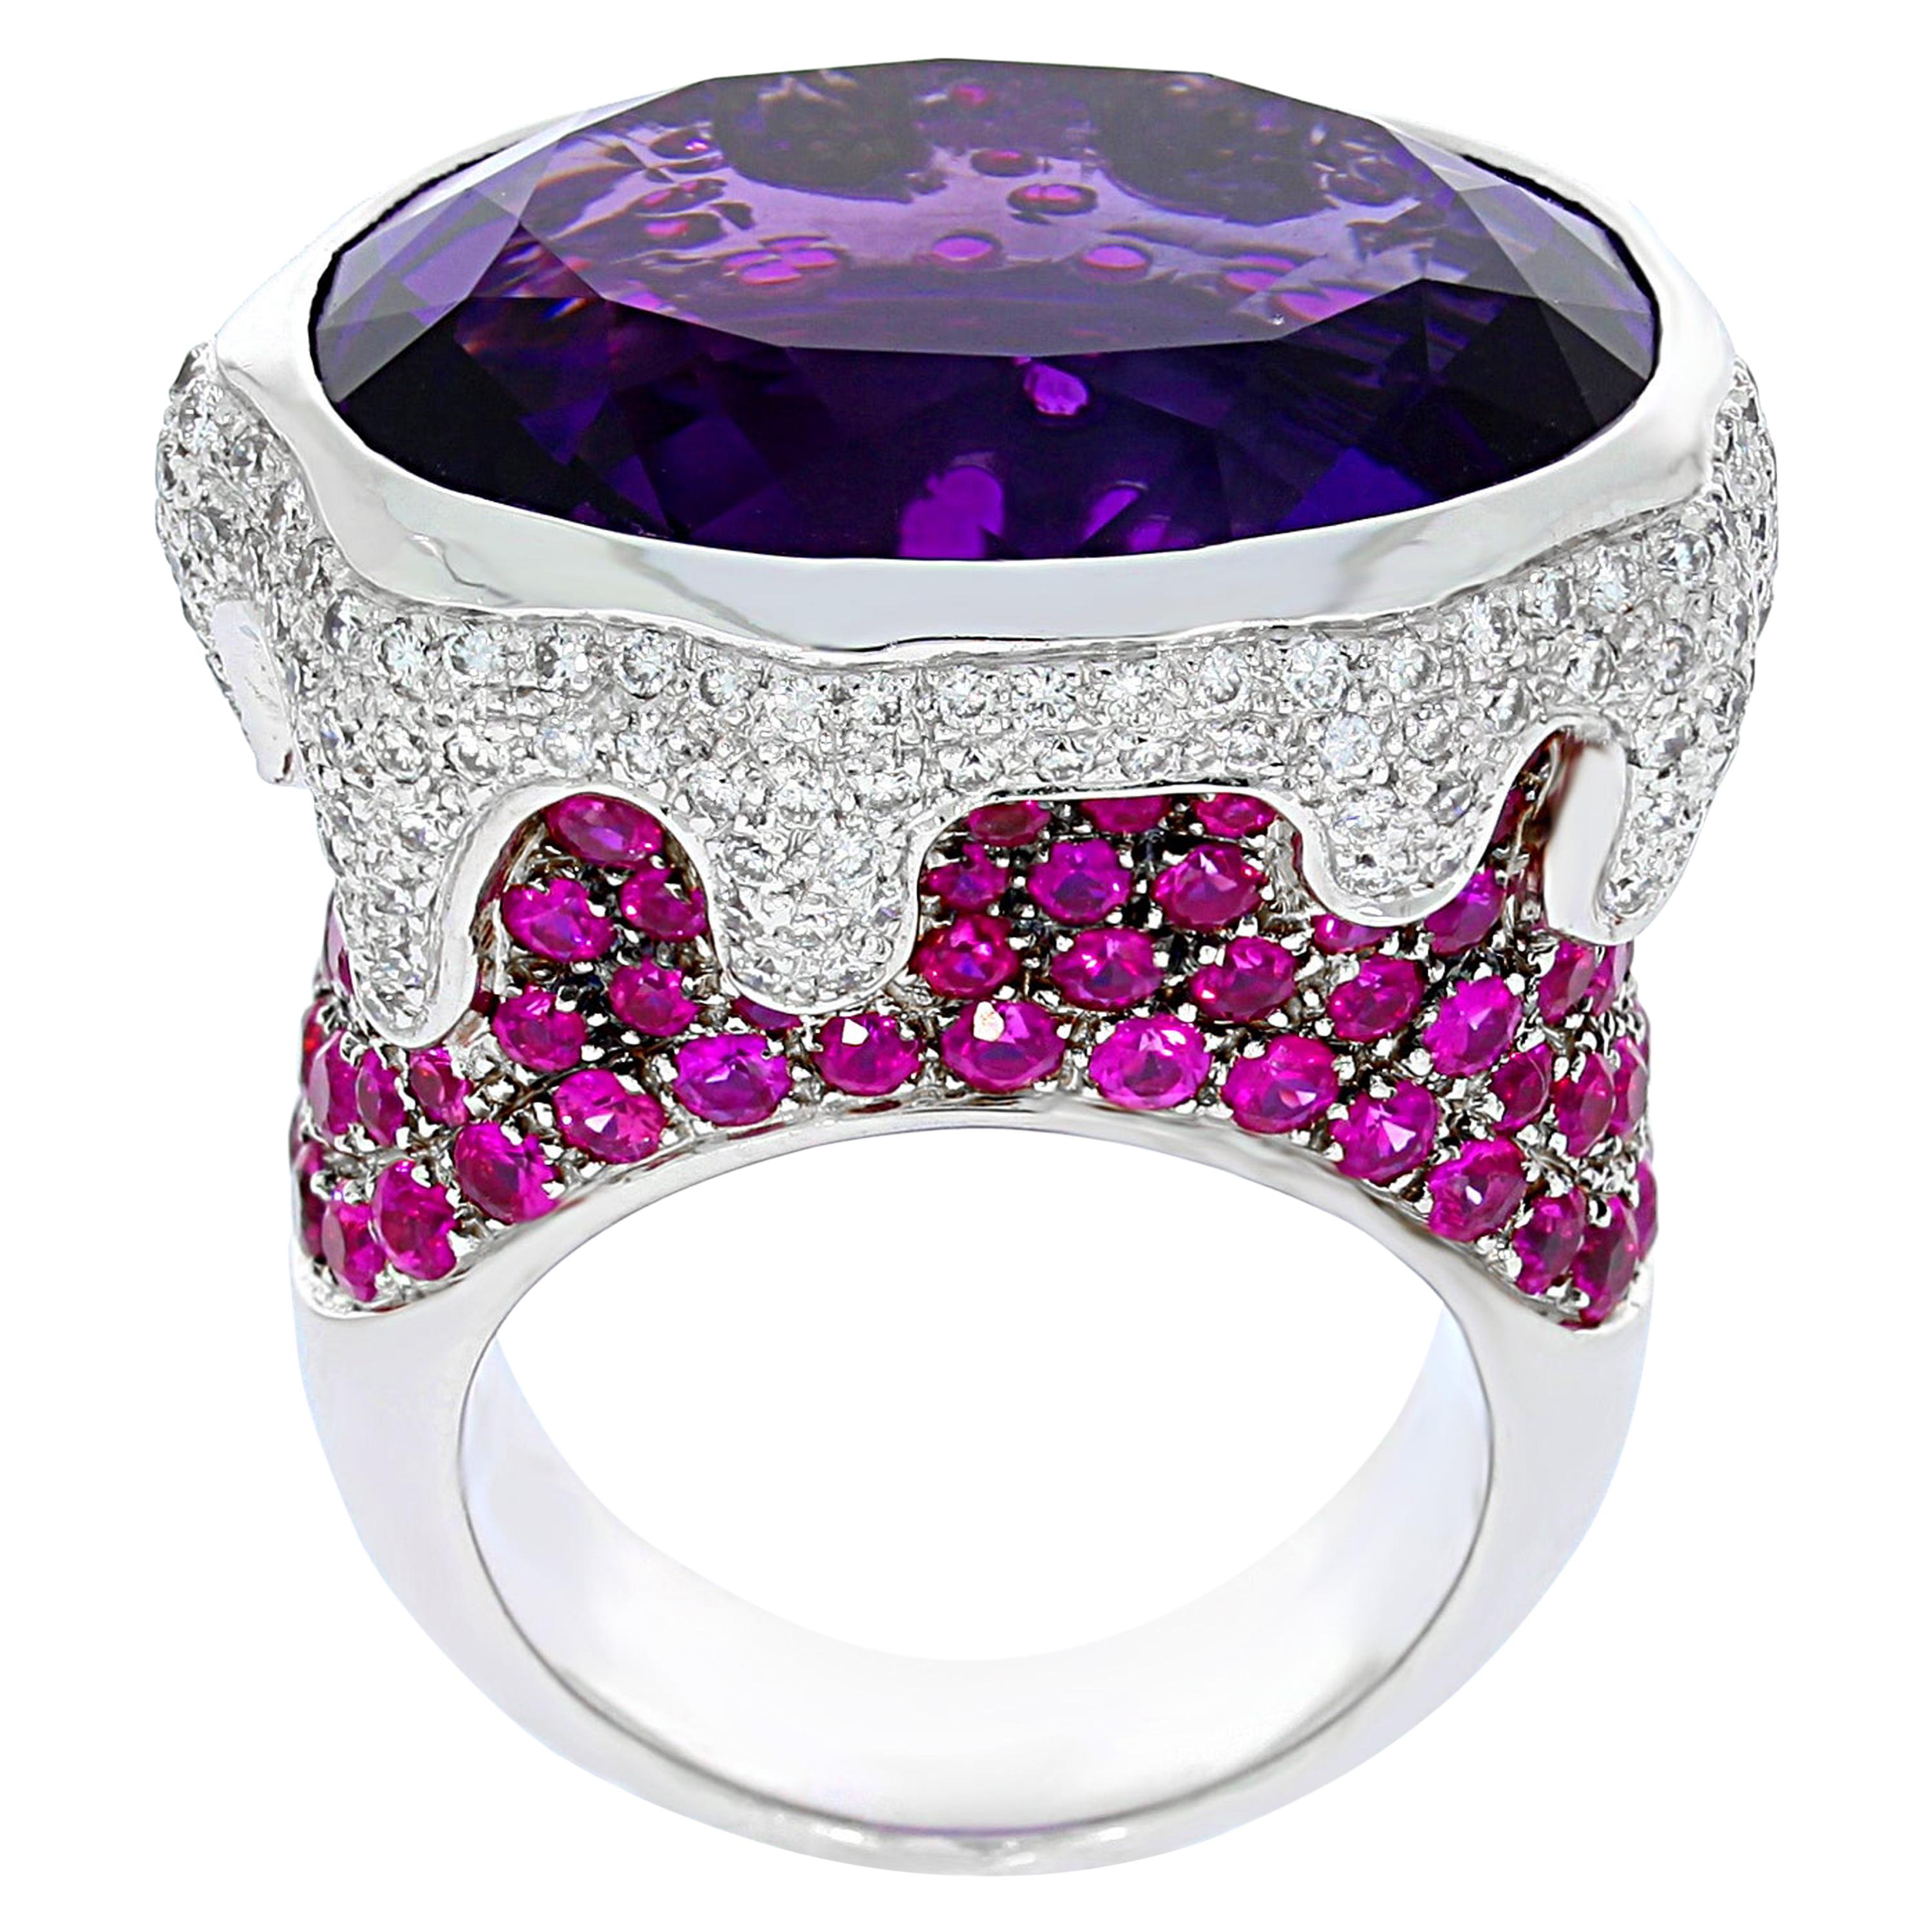 Chatila 26.58 Carat Amethyst Ruby and Diamond Ring For Sale